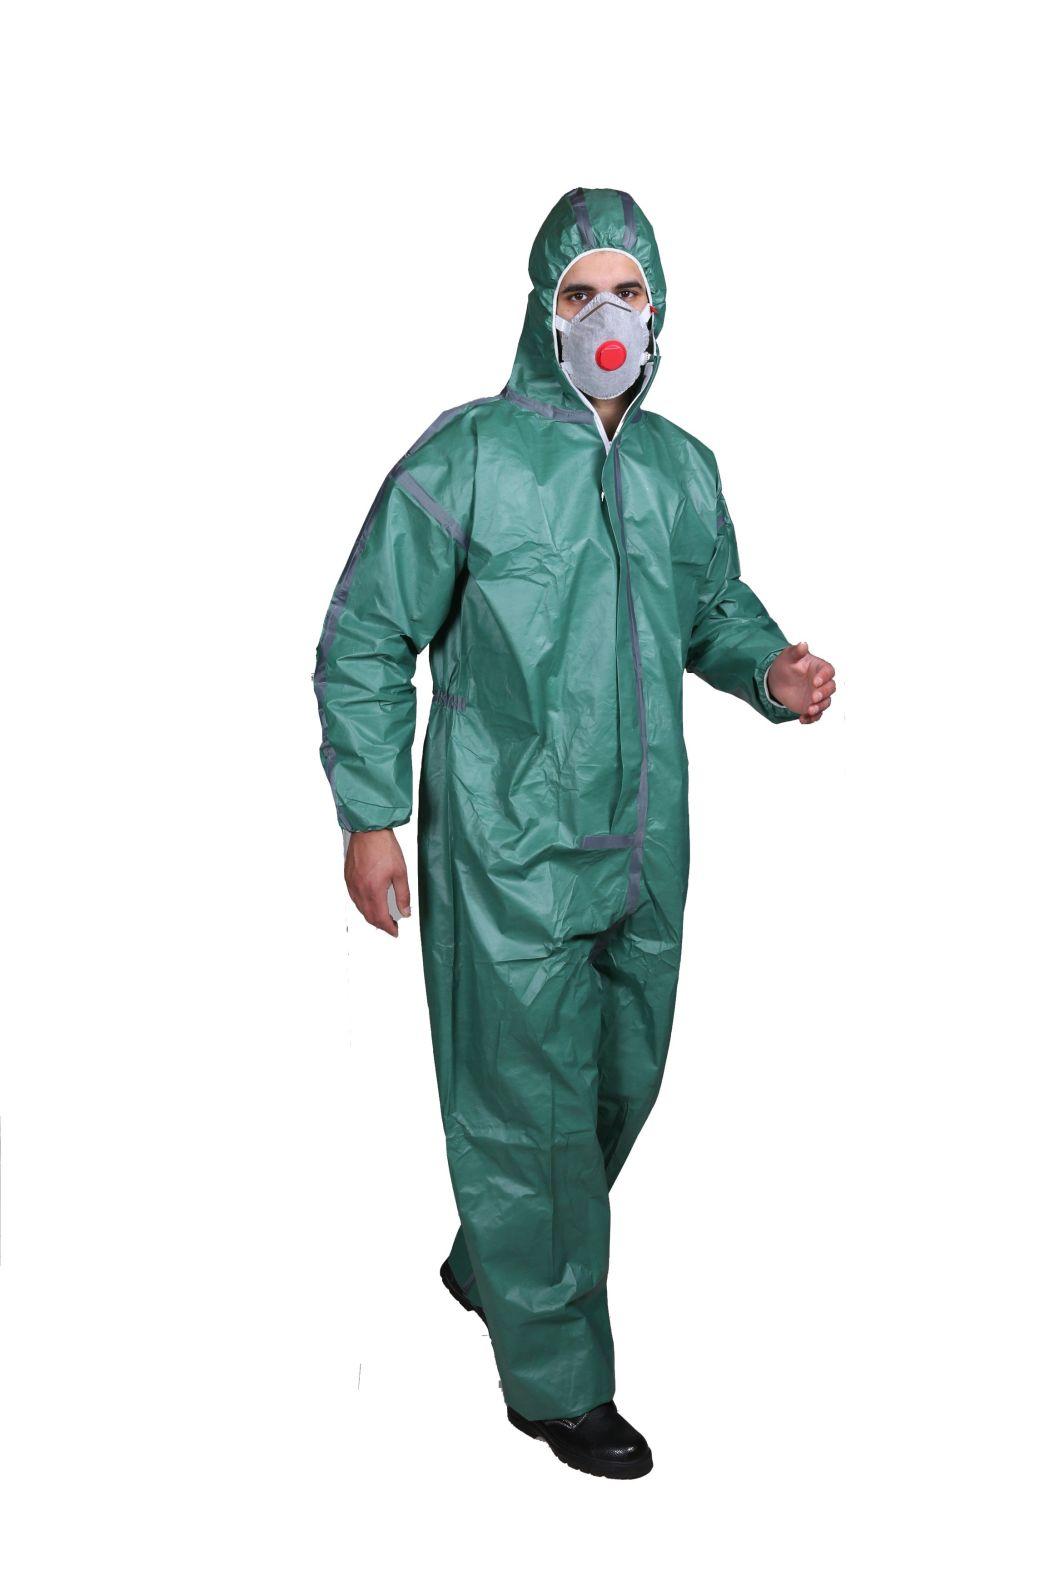 Type 4/5/6 Professional Manufacturer White Coverall Antistatic Isolation Operating Room Healthcare Overall Working Suit